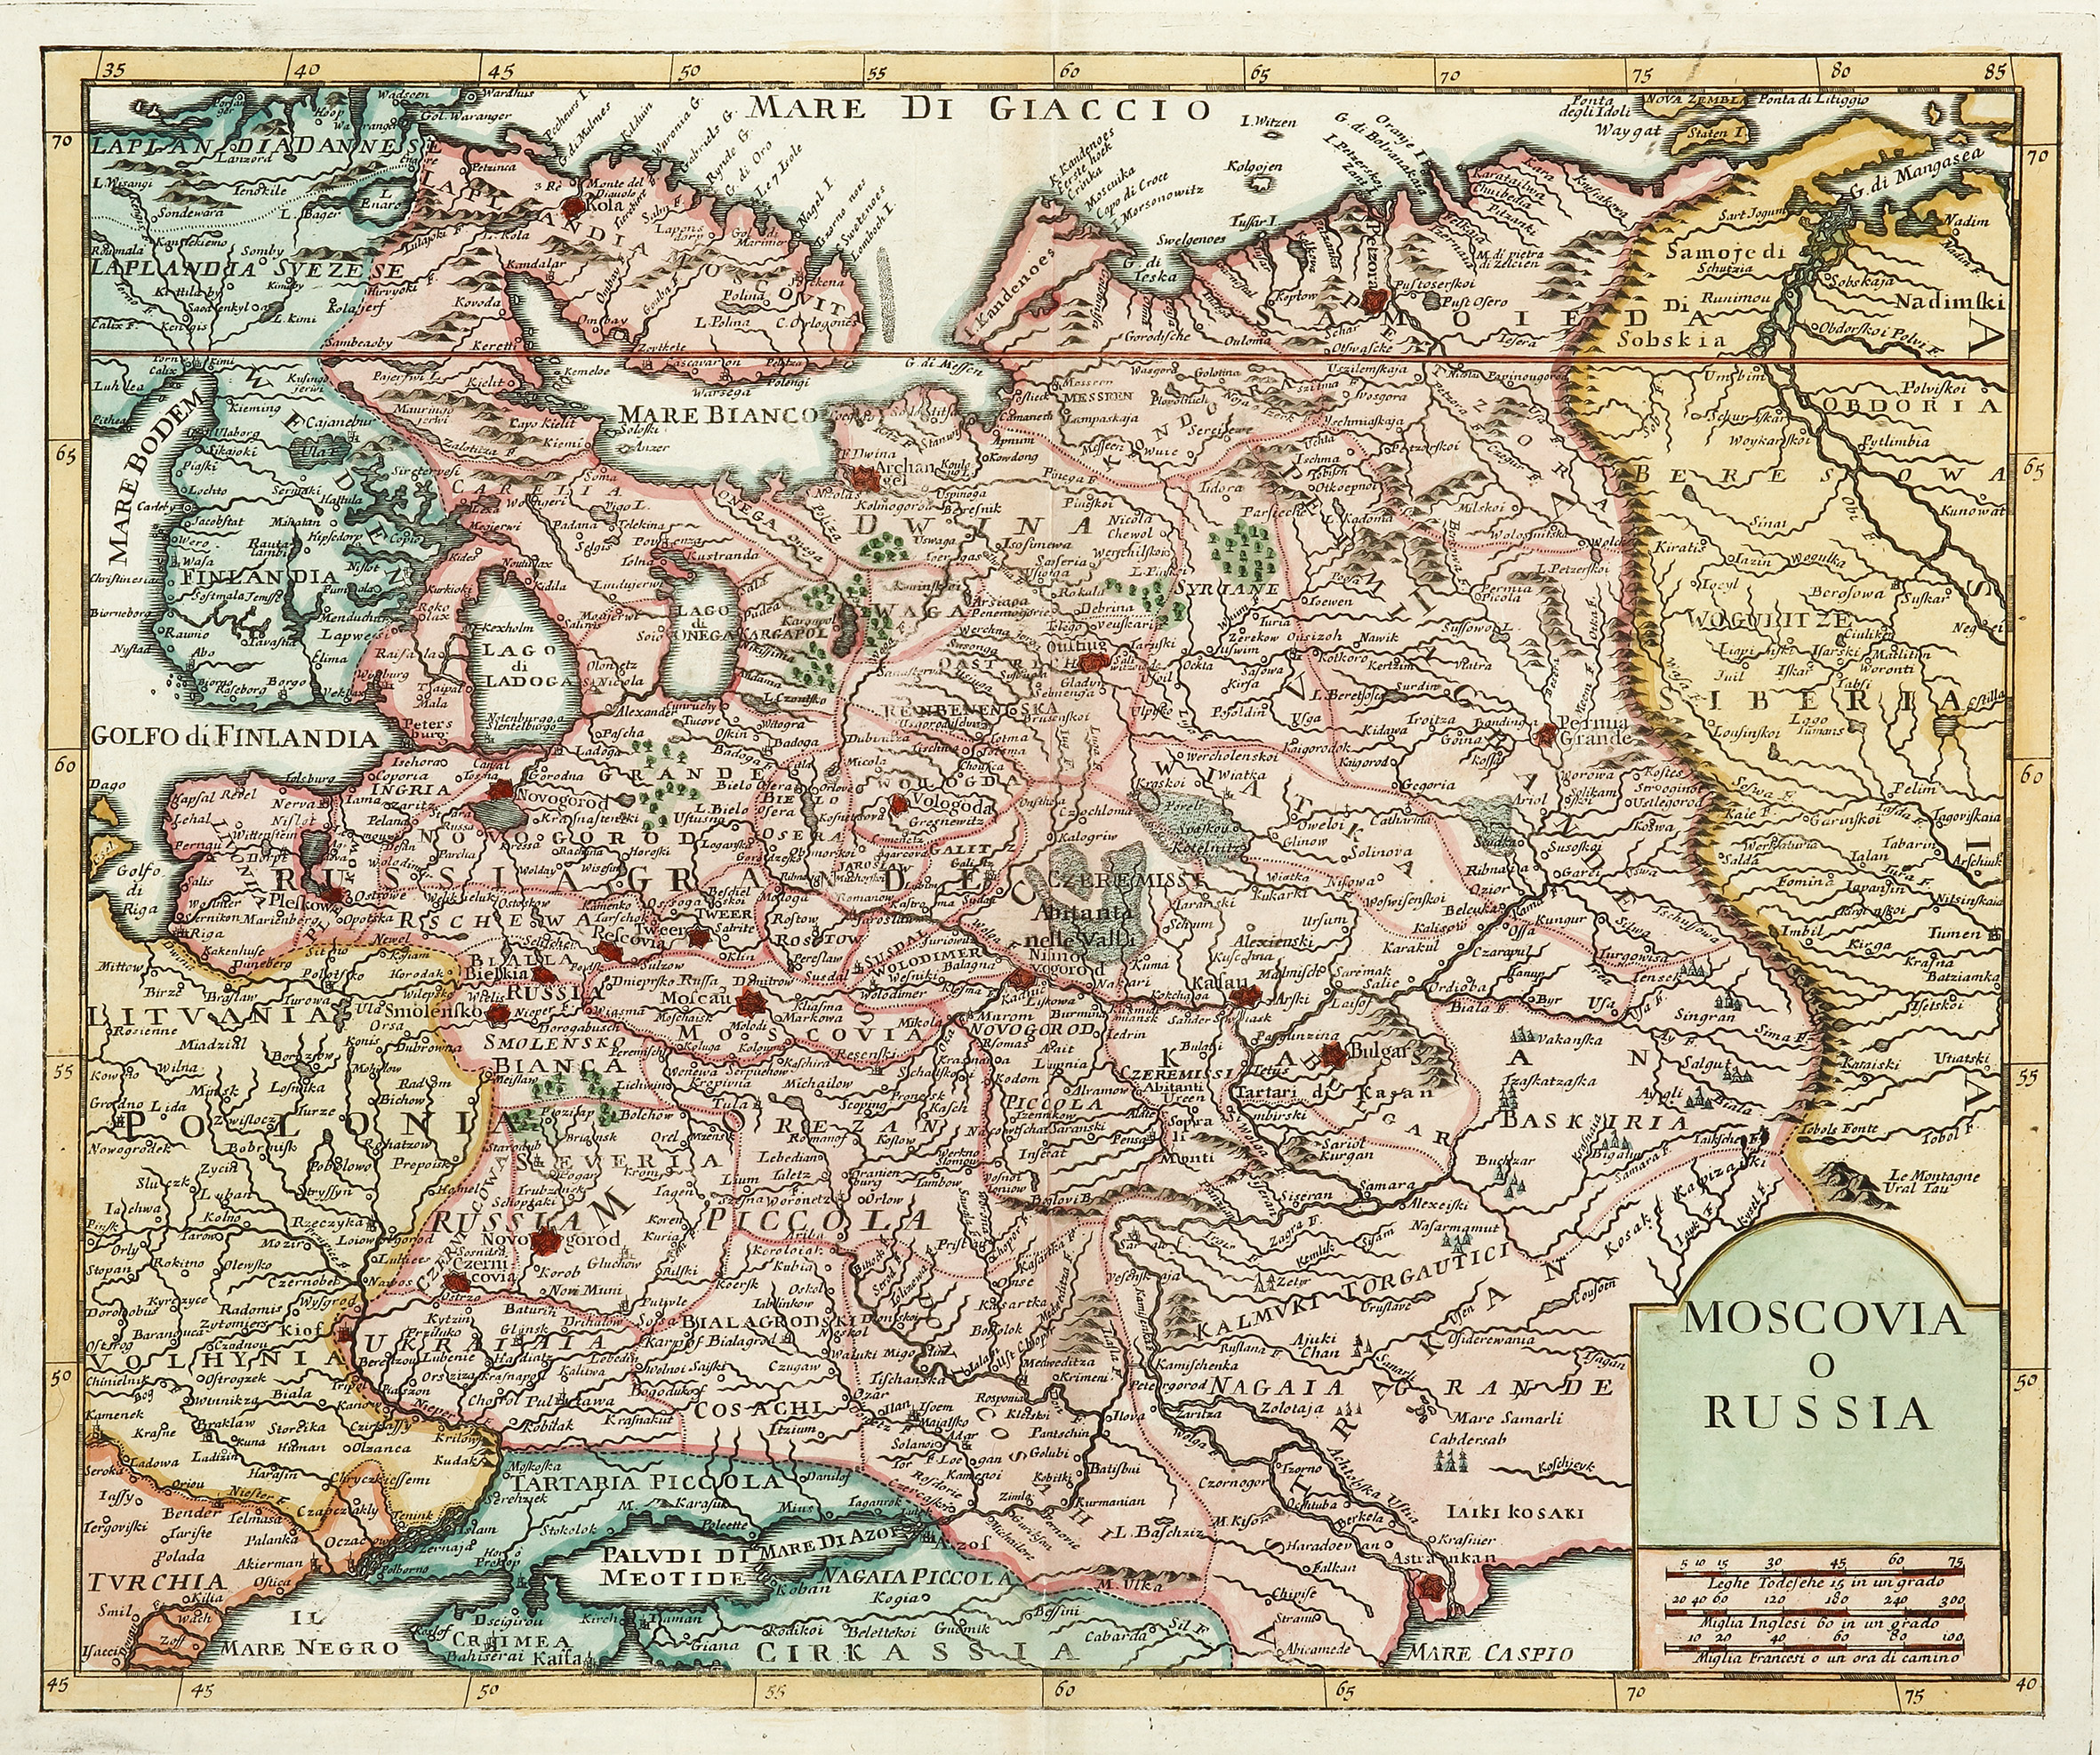 Moscovia o Russia - Antique Print from 1740